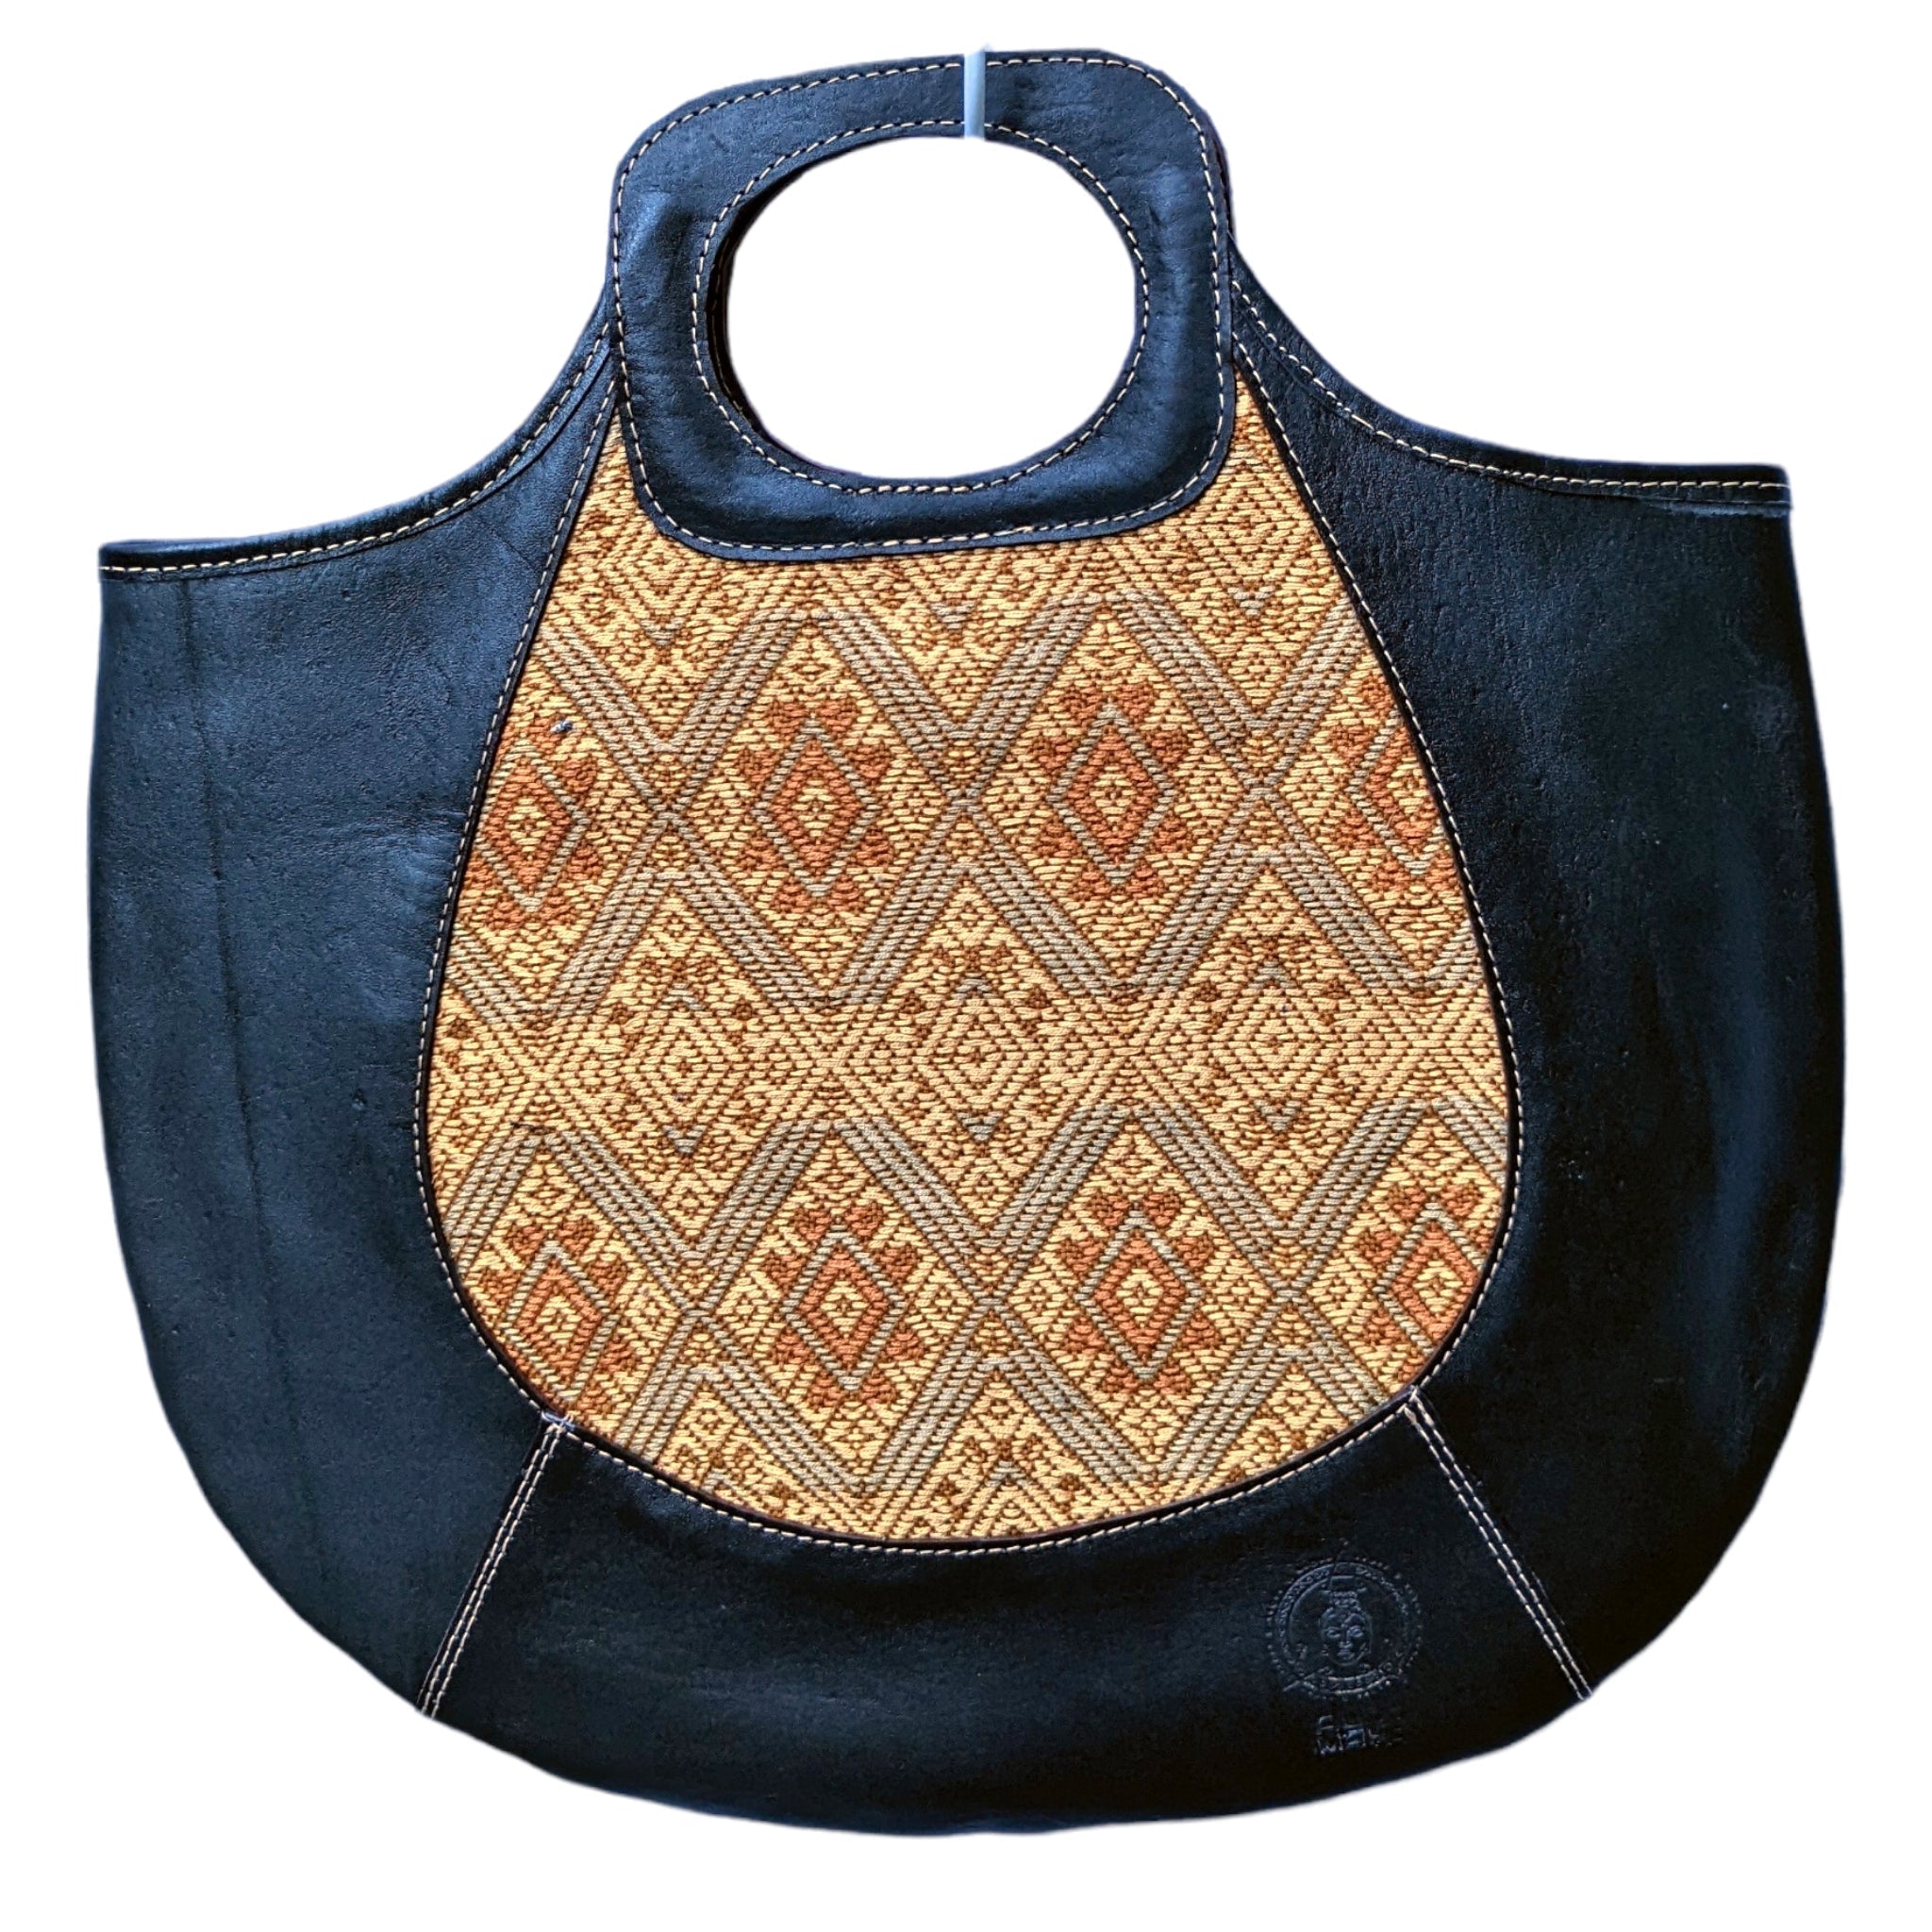 Discover the Beauty of Handcrafted One-of-a-Kind Bags from House of Ta -  House Of Takura